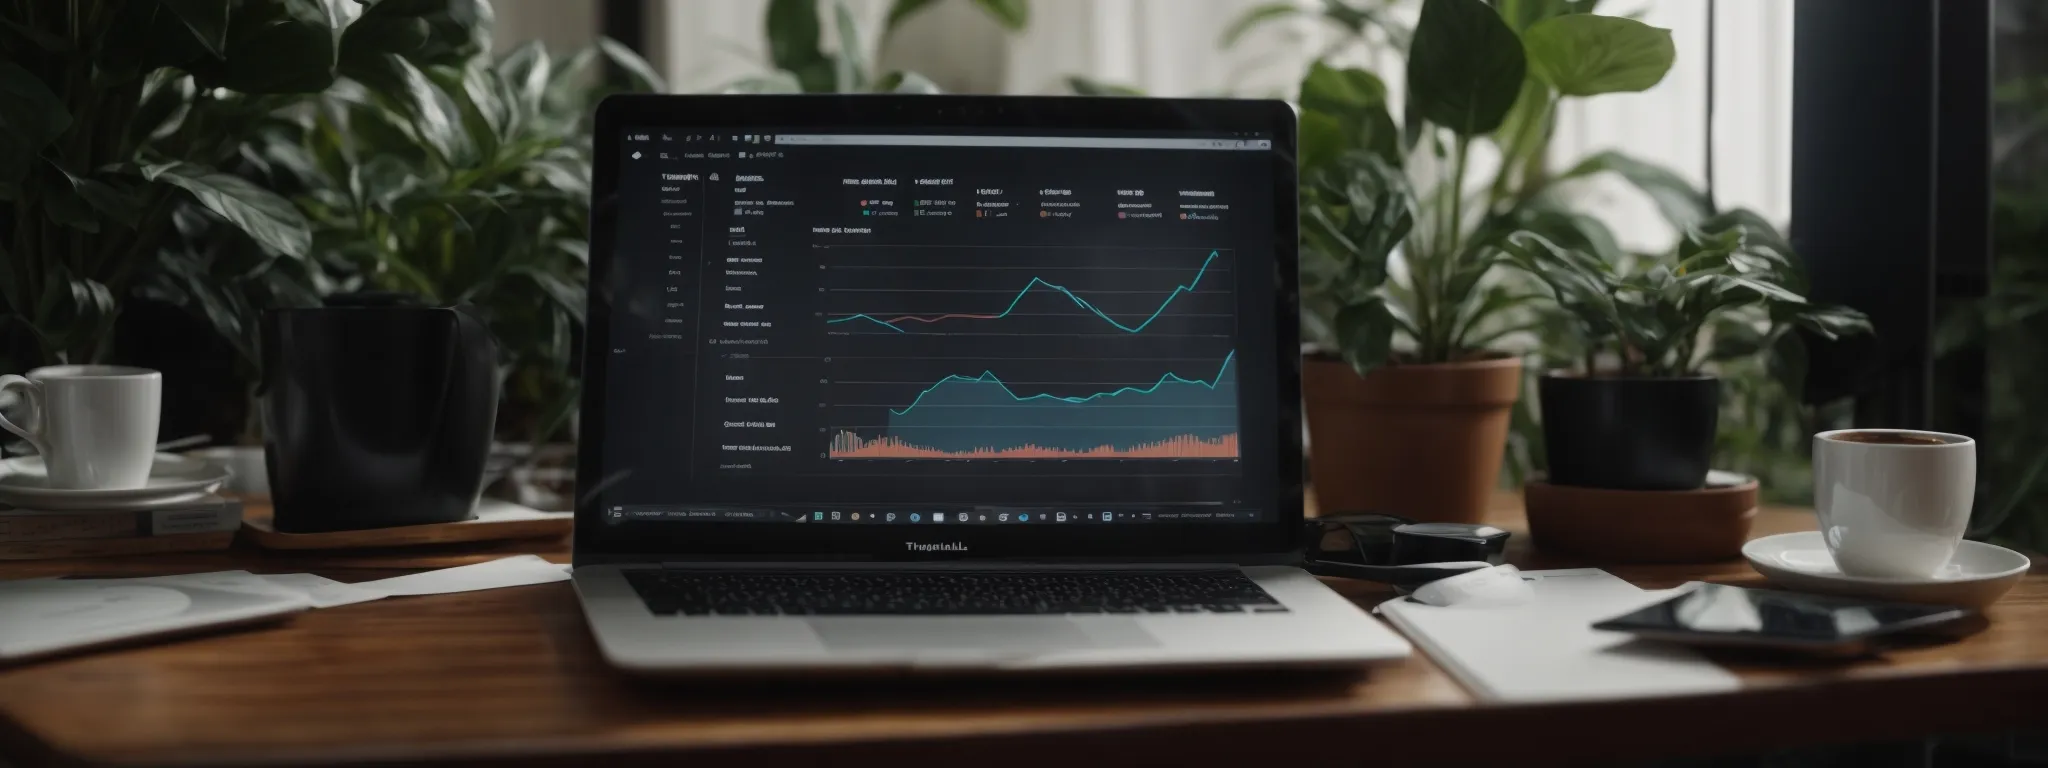 a laptop with graphs and analytics on the screen beside a potted plant and a coffee cup on a desk.